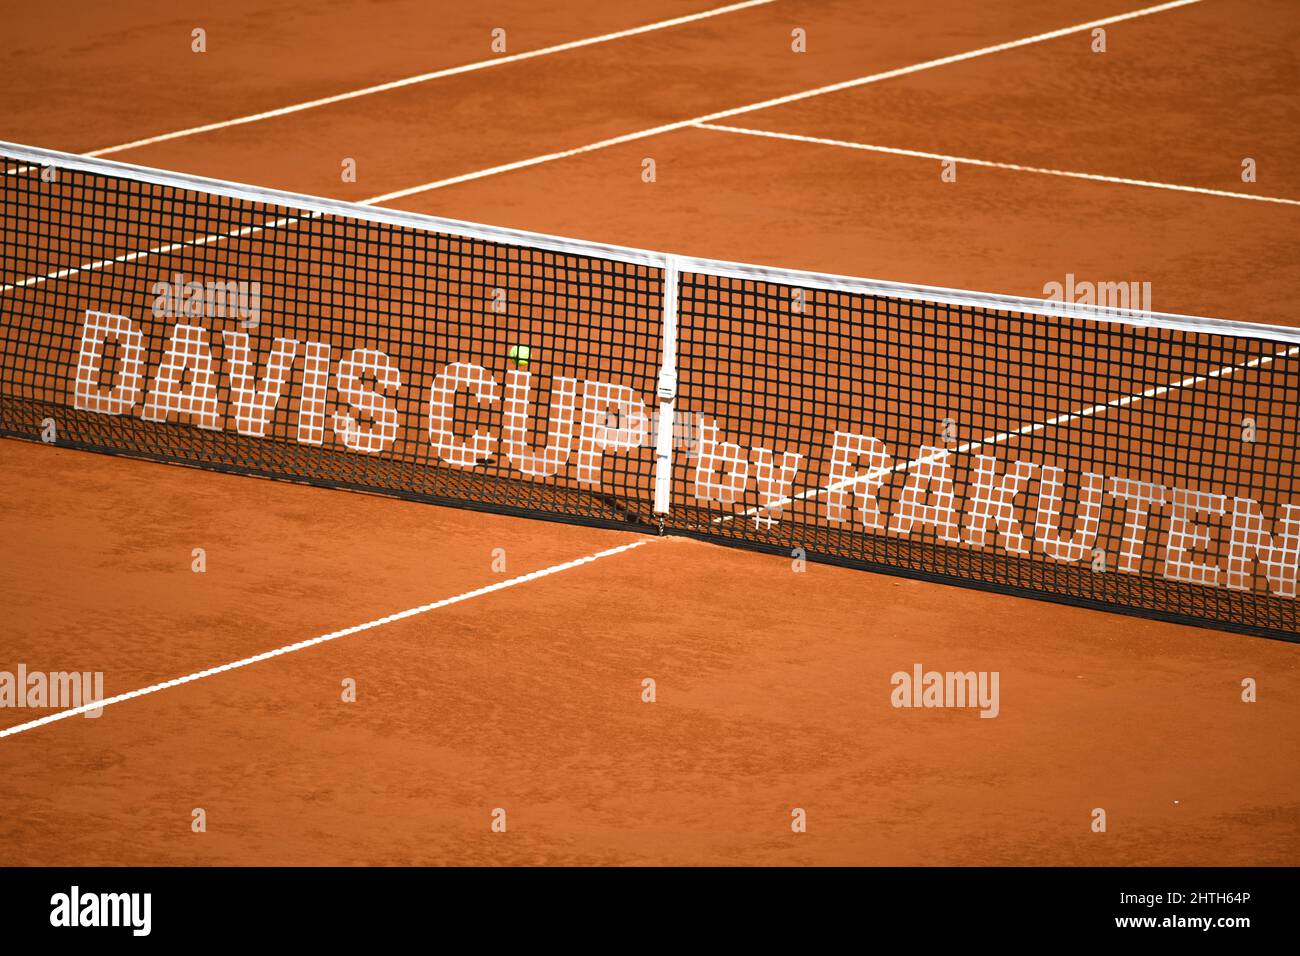 Davis Cup: Central Court from Buenos Aires Lawn Tennis Club, Argentina  Stock Photo - Alamy